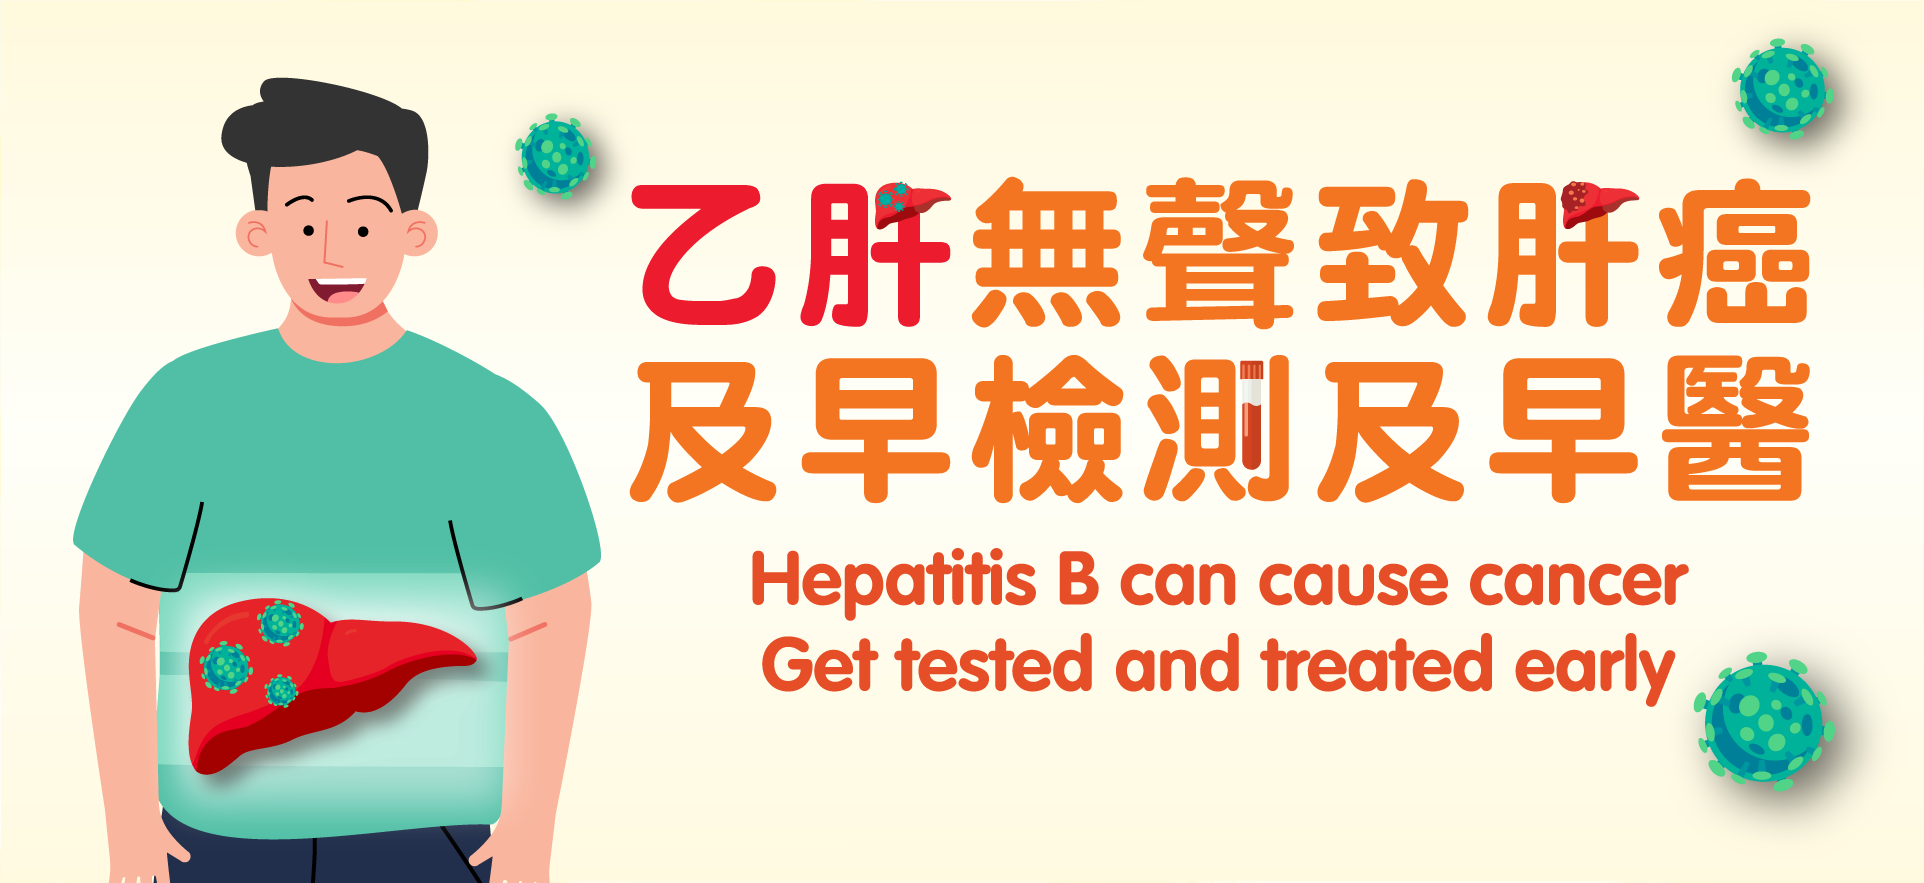 Hepatitis B can cause cancer Get tested and treated early